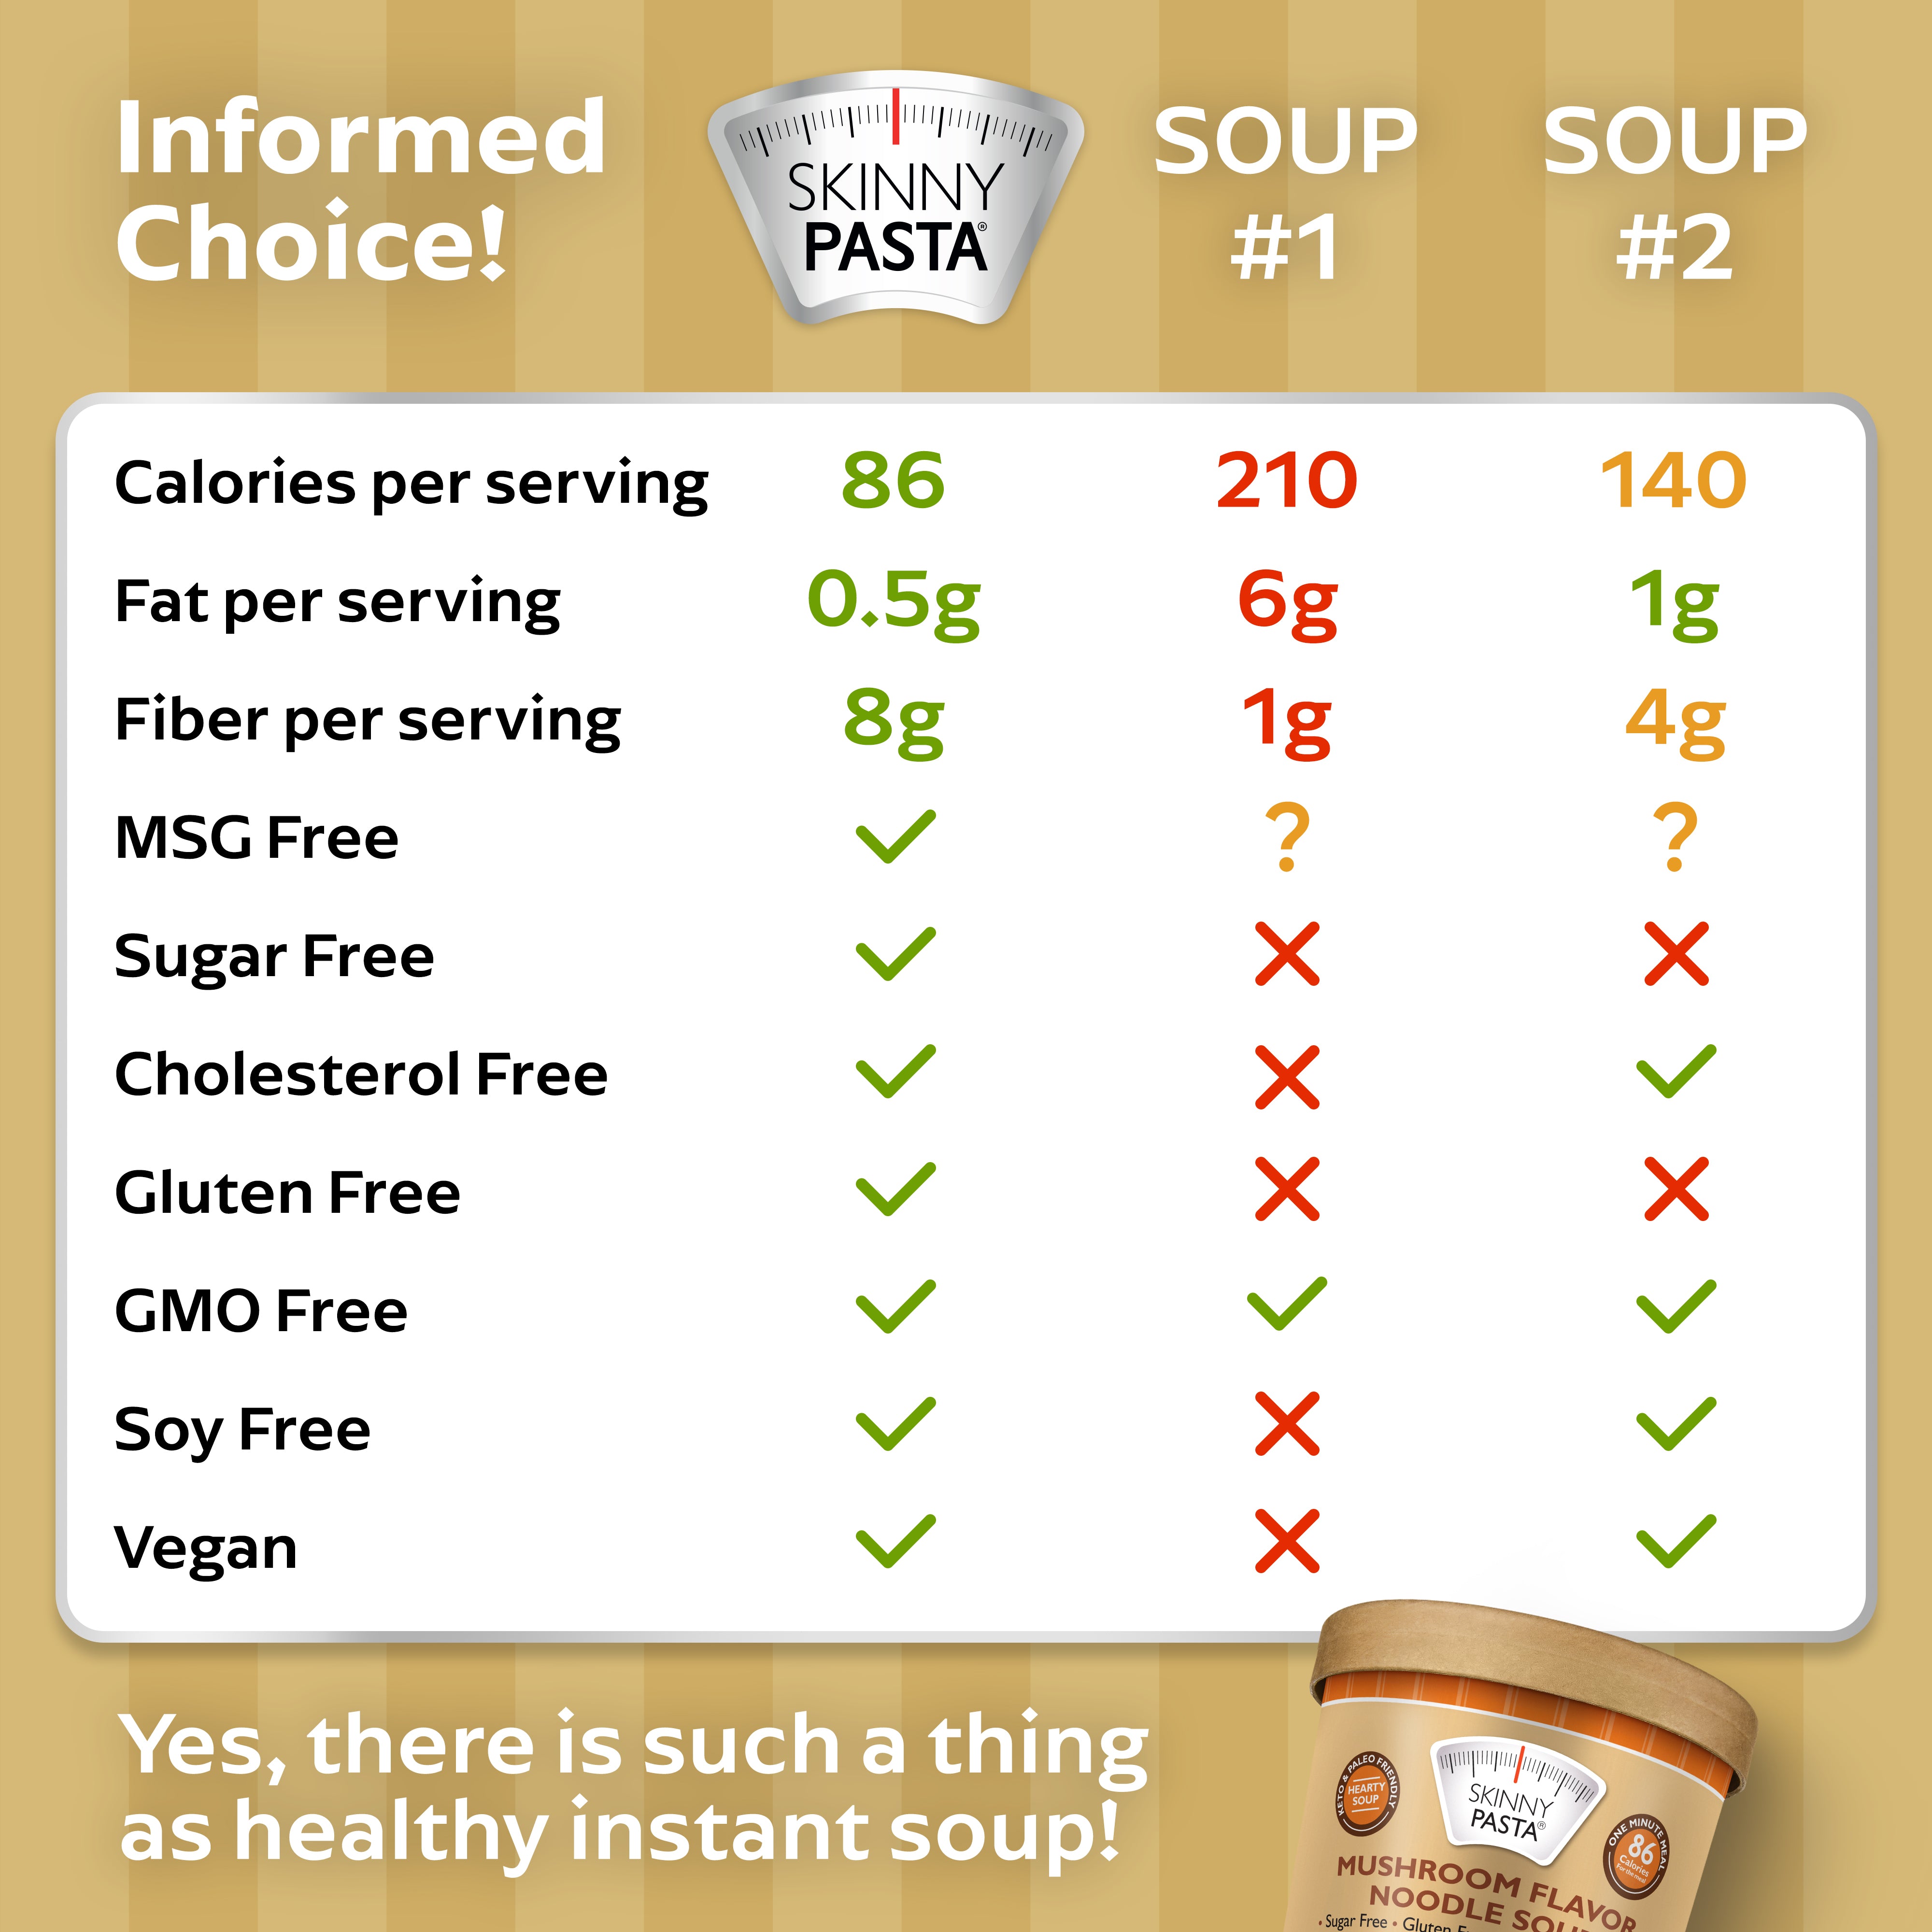 Skinny Soup Mushroom Flavor - 6 Pack: Instant, Low-Calorie, Ready-to-Eat Noodles